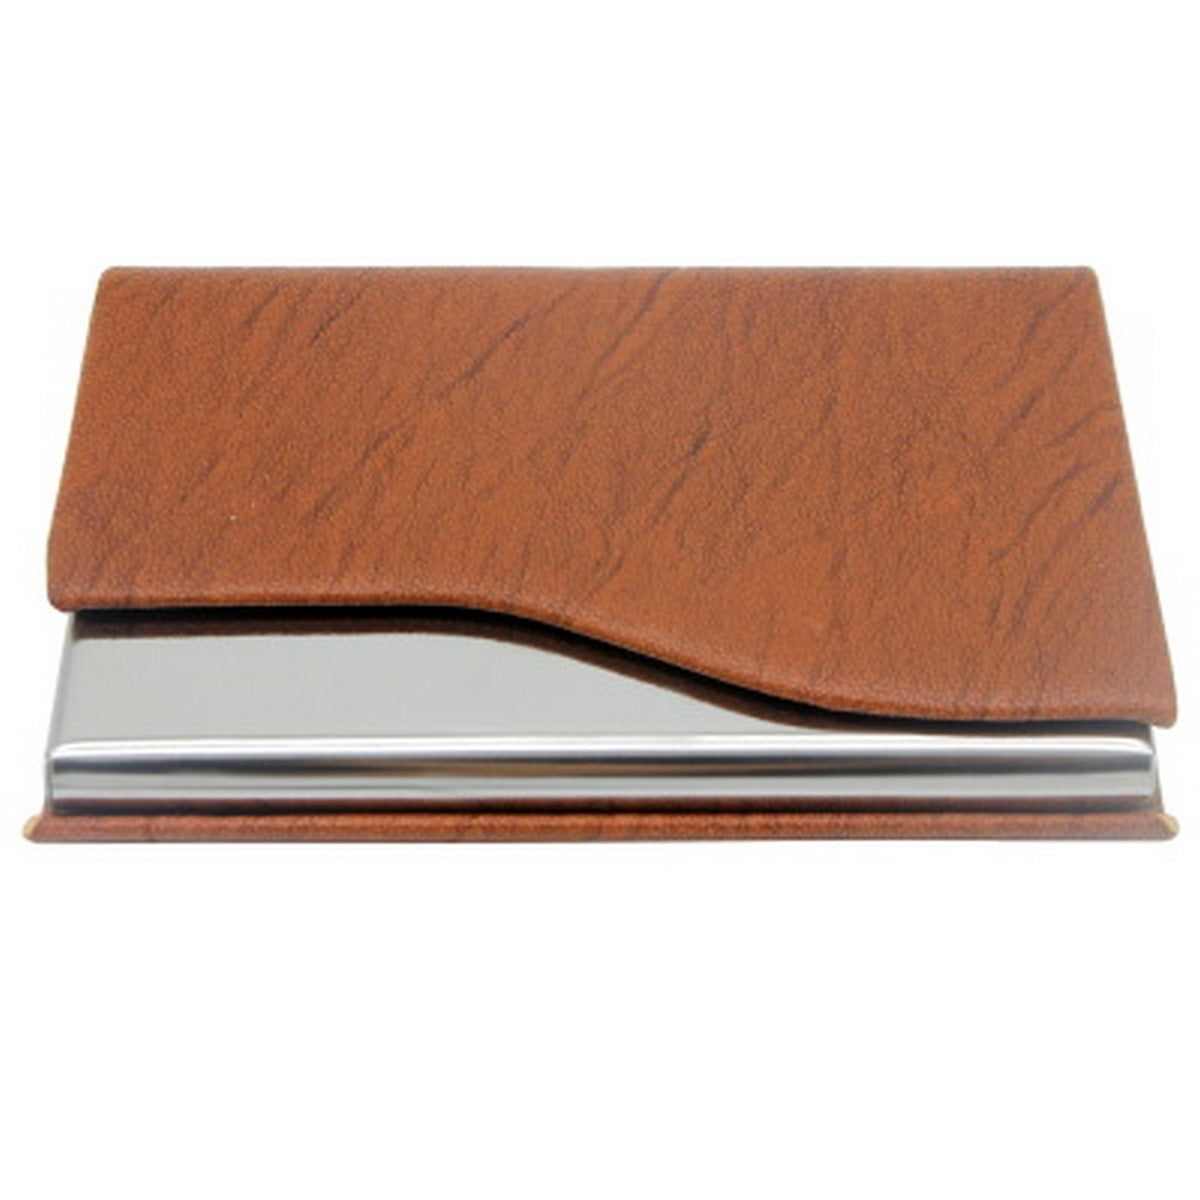 Tan Magnetic Business Visiting Card Holder - For Corporate Gifting, Event Gifting, Freebies, Promotions JA (133) MCH29BR